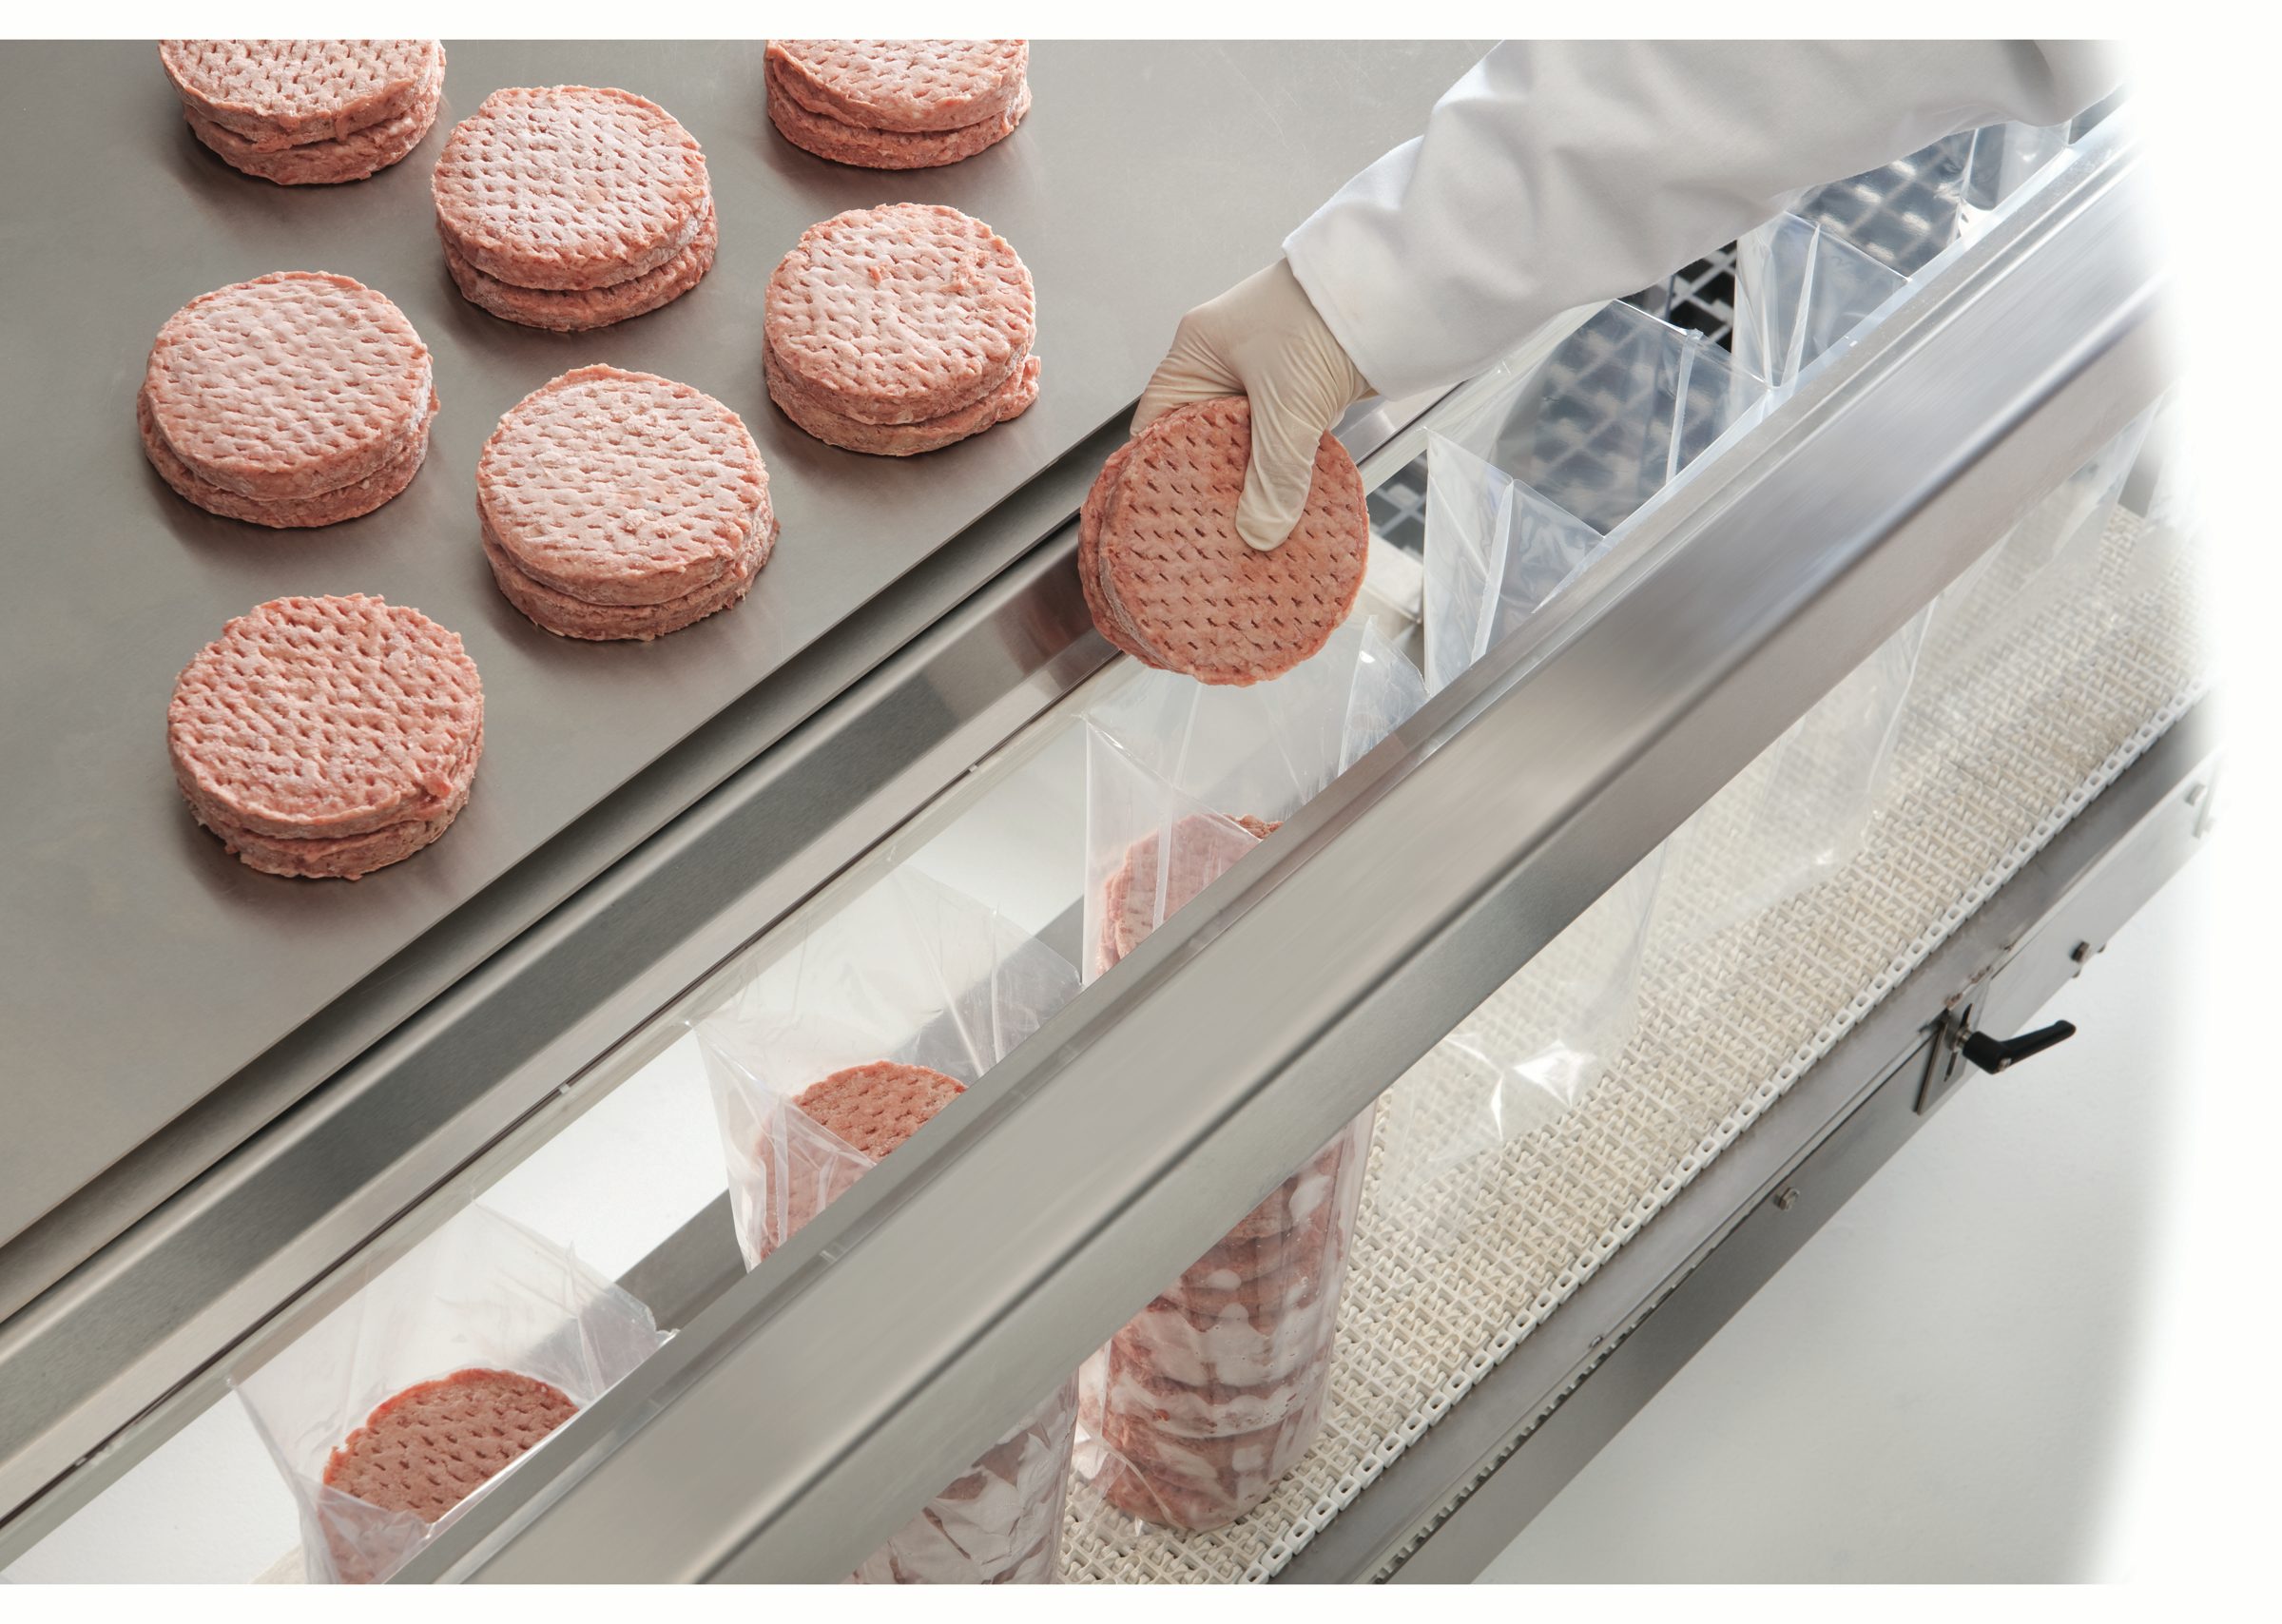 worker placing burger patties into SidePouch System